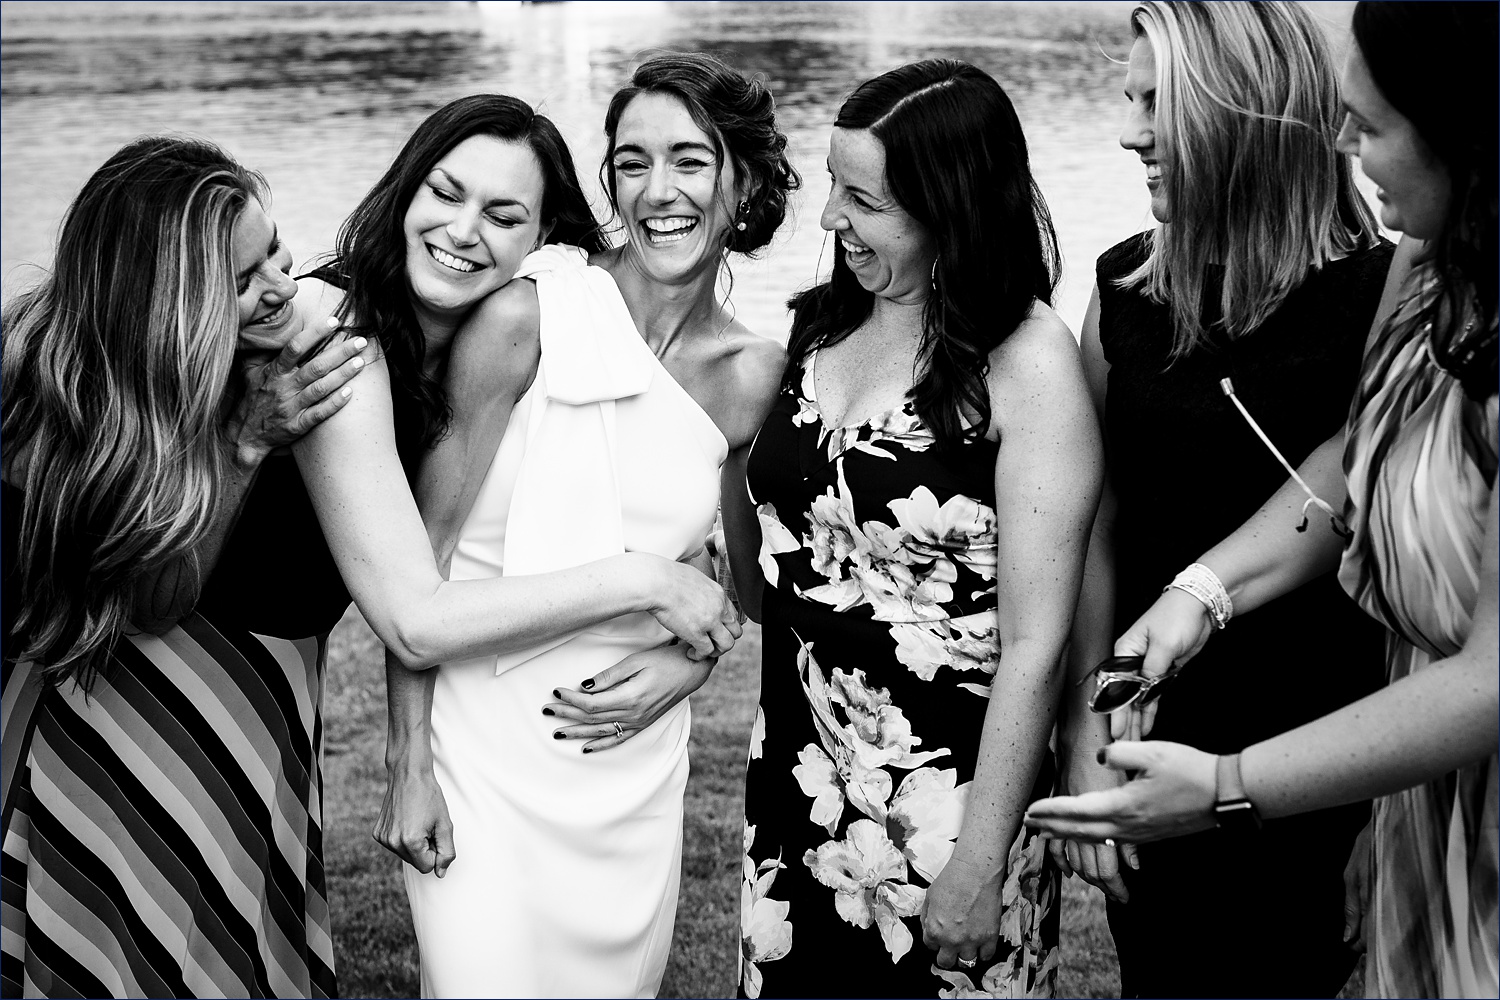 The bride and her best friends hug each other tight in celebration of her wedding day